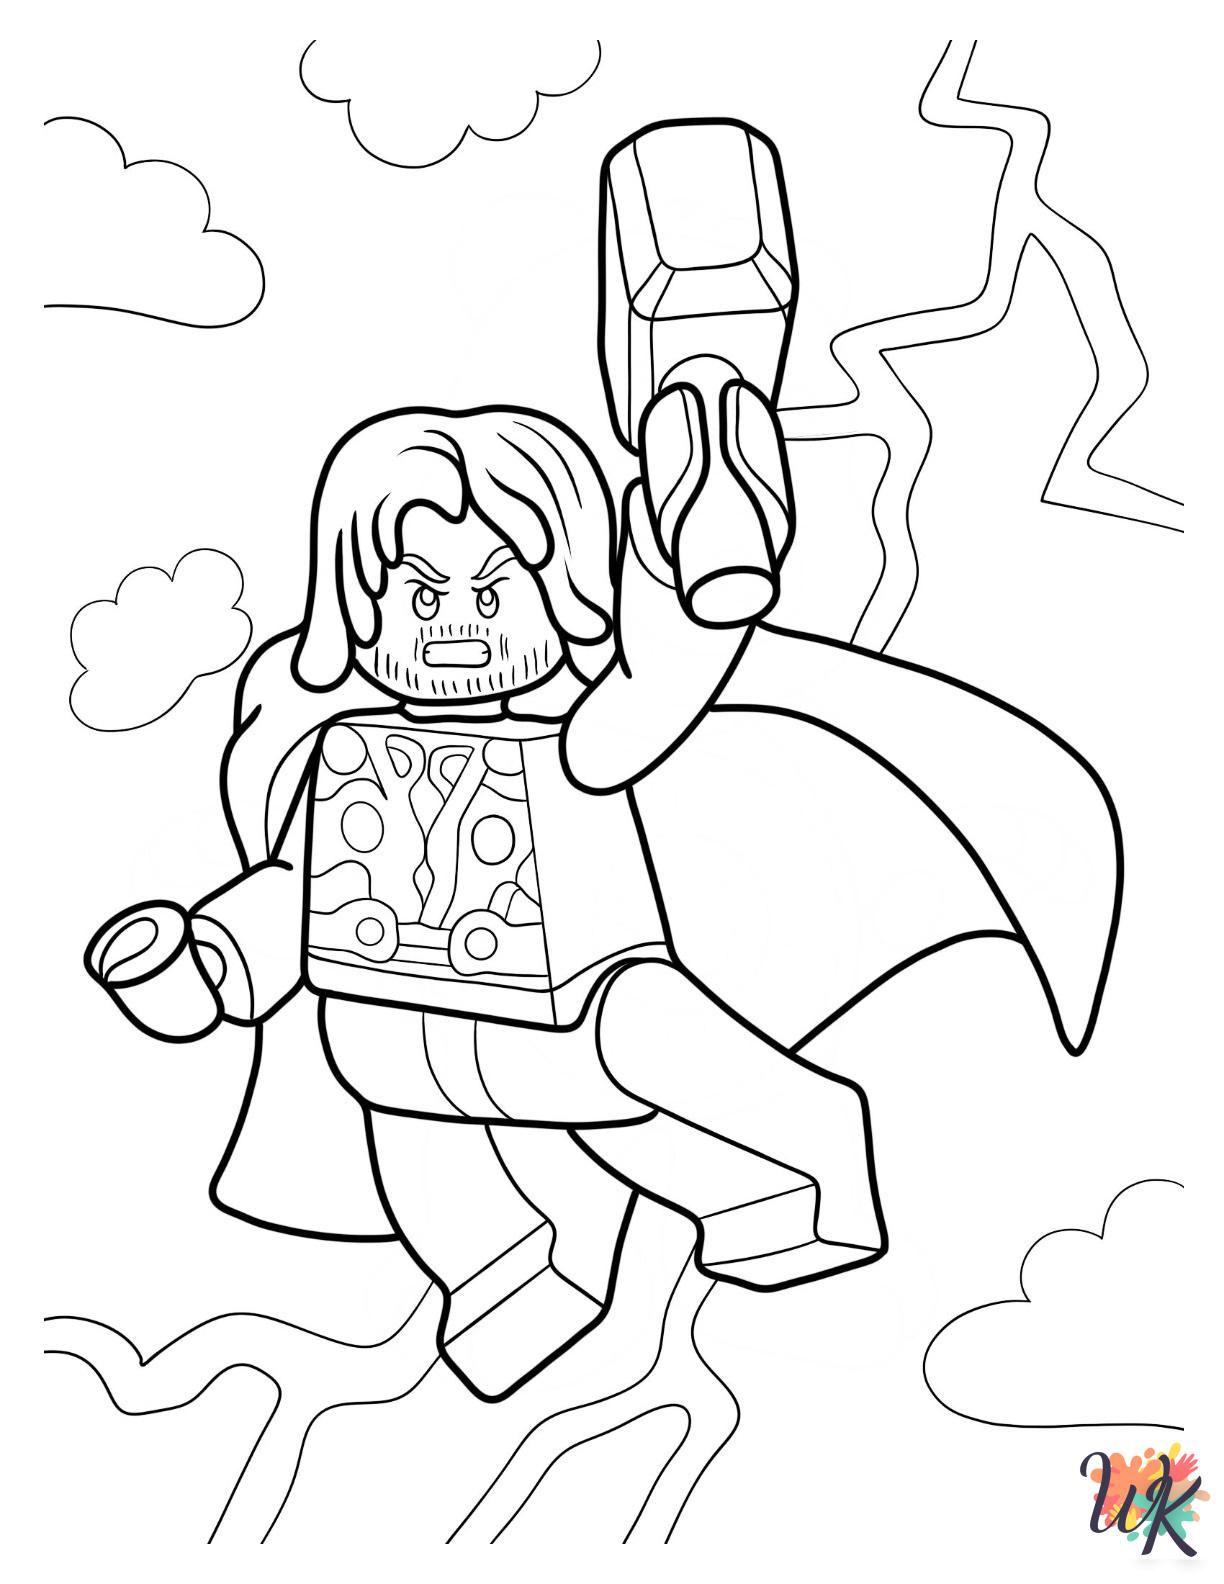 Lego Avengers coloring pages easy